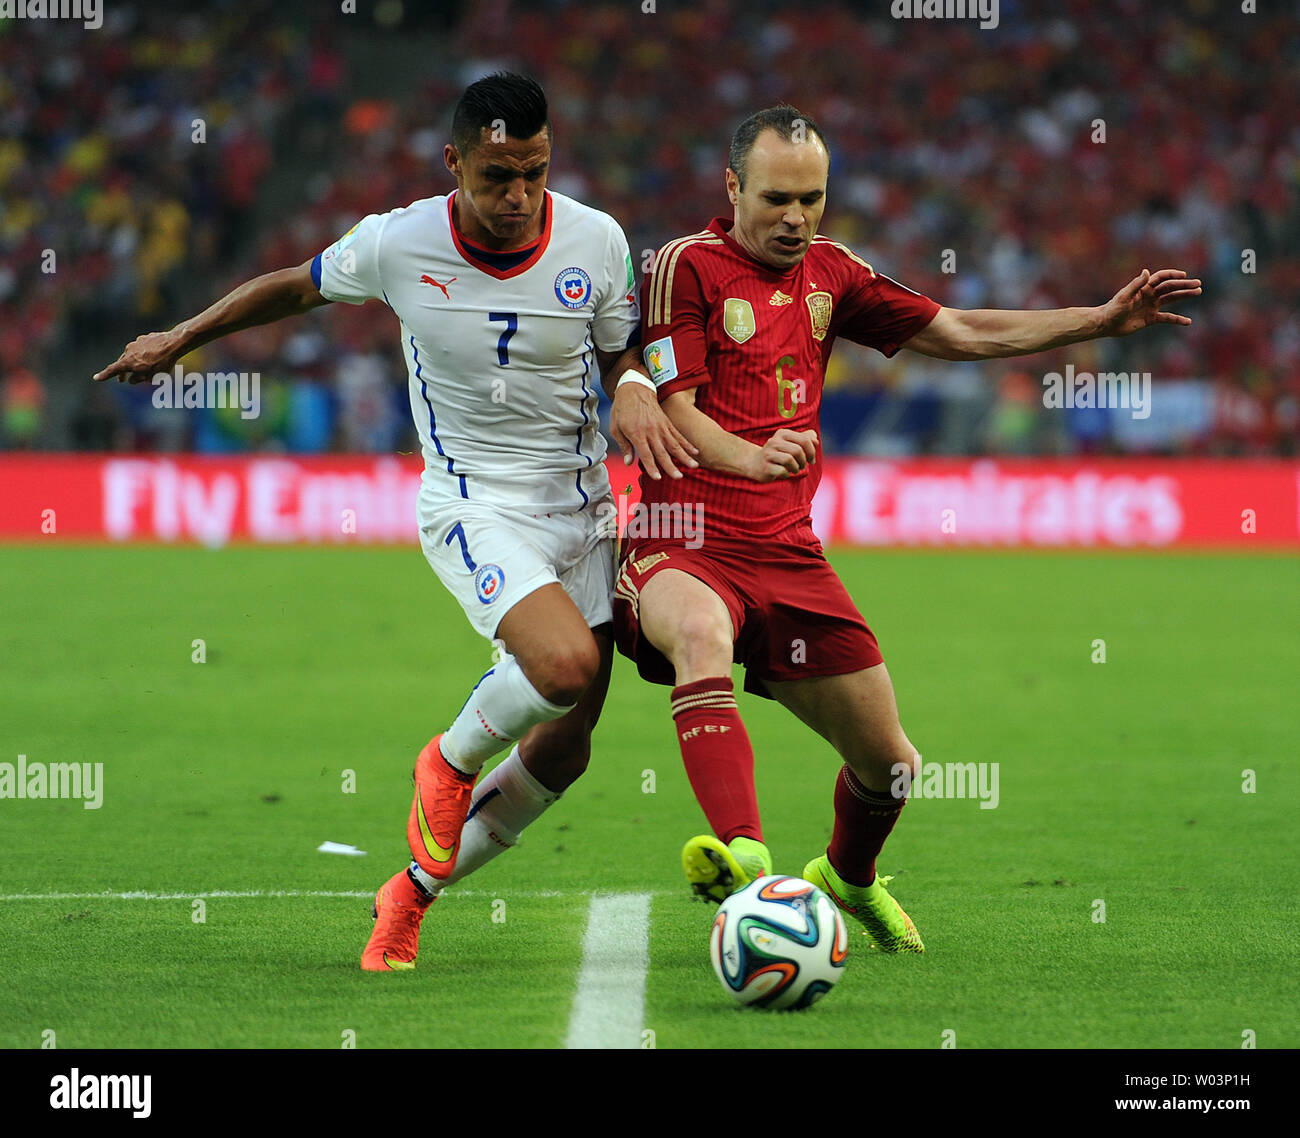 Andres Iniesta of Spain competes with Alexis Sanchez (L) of Chile during the 2014 FIFA World Cup Group B match at the Estadio do Maracana in Rio de Janeiro, Brazil on June 18, 2014. UPI/Chris Brunskill Stock Photo